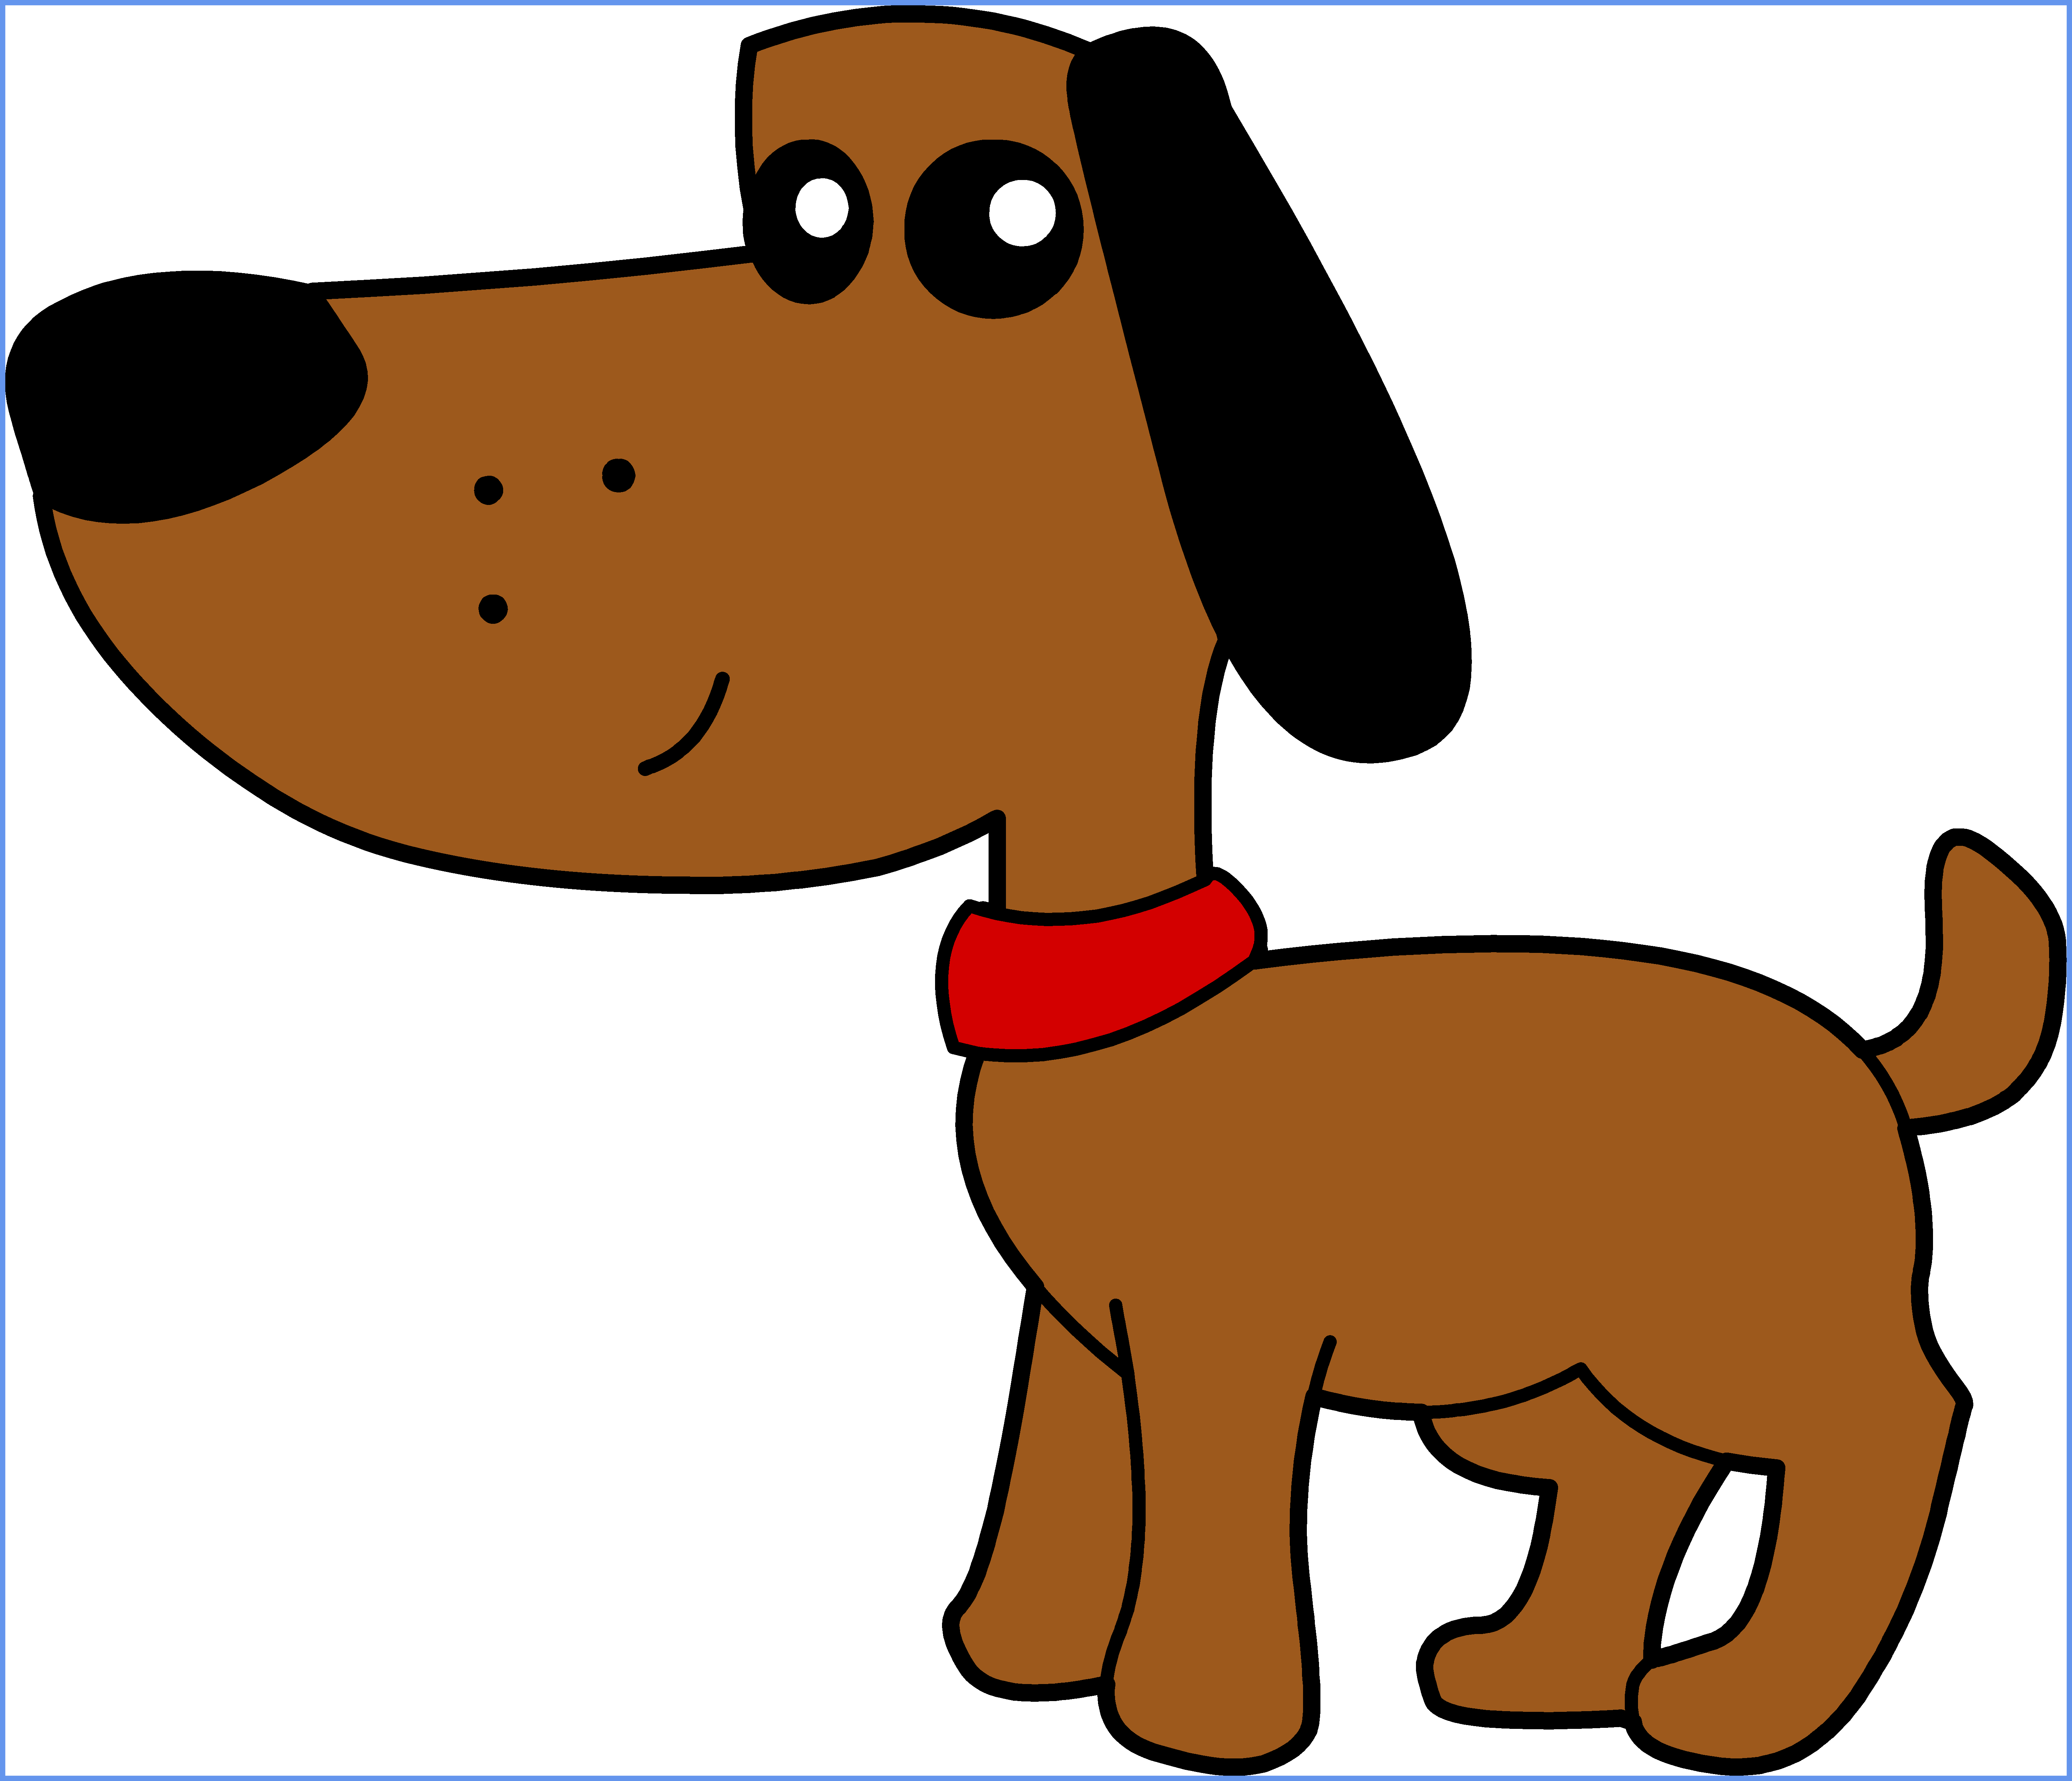 Cute dog at getdrawings. Dogs clipart summer